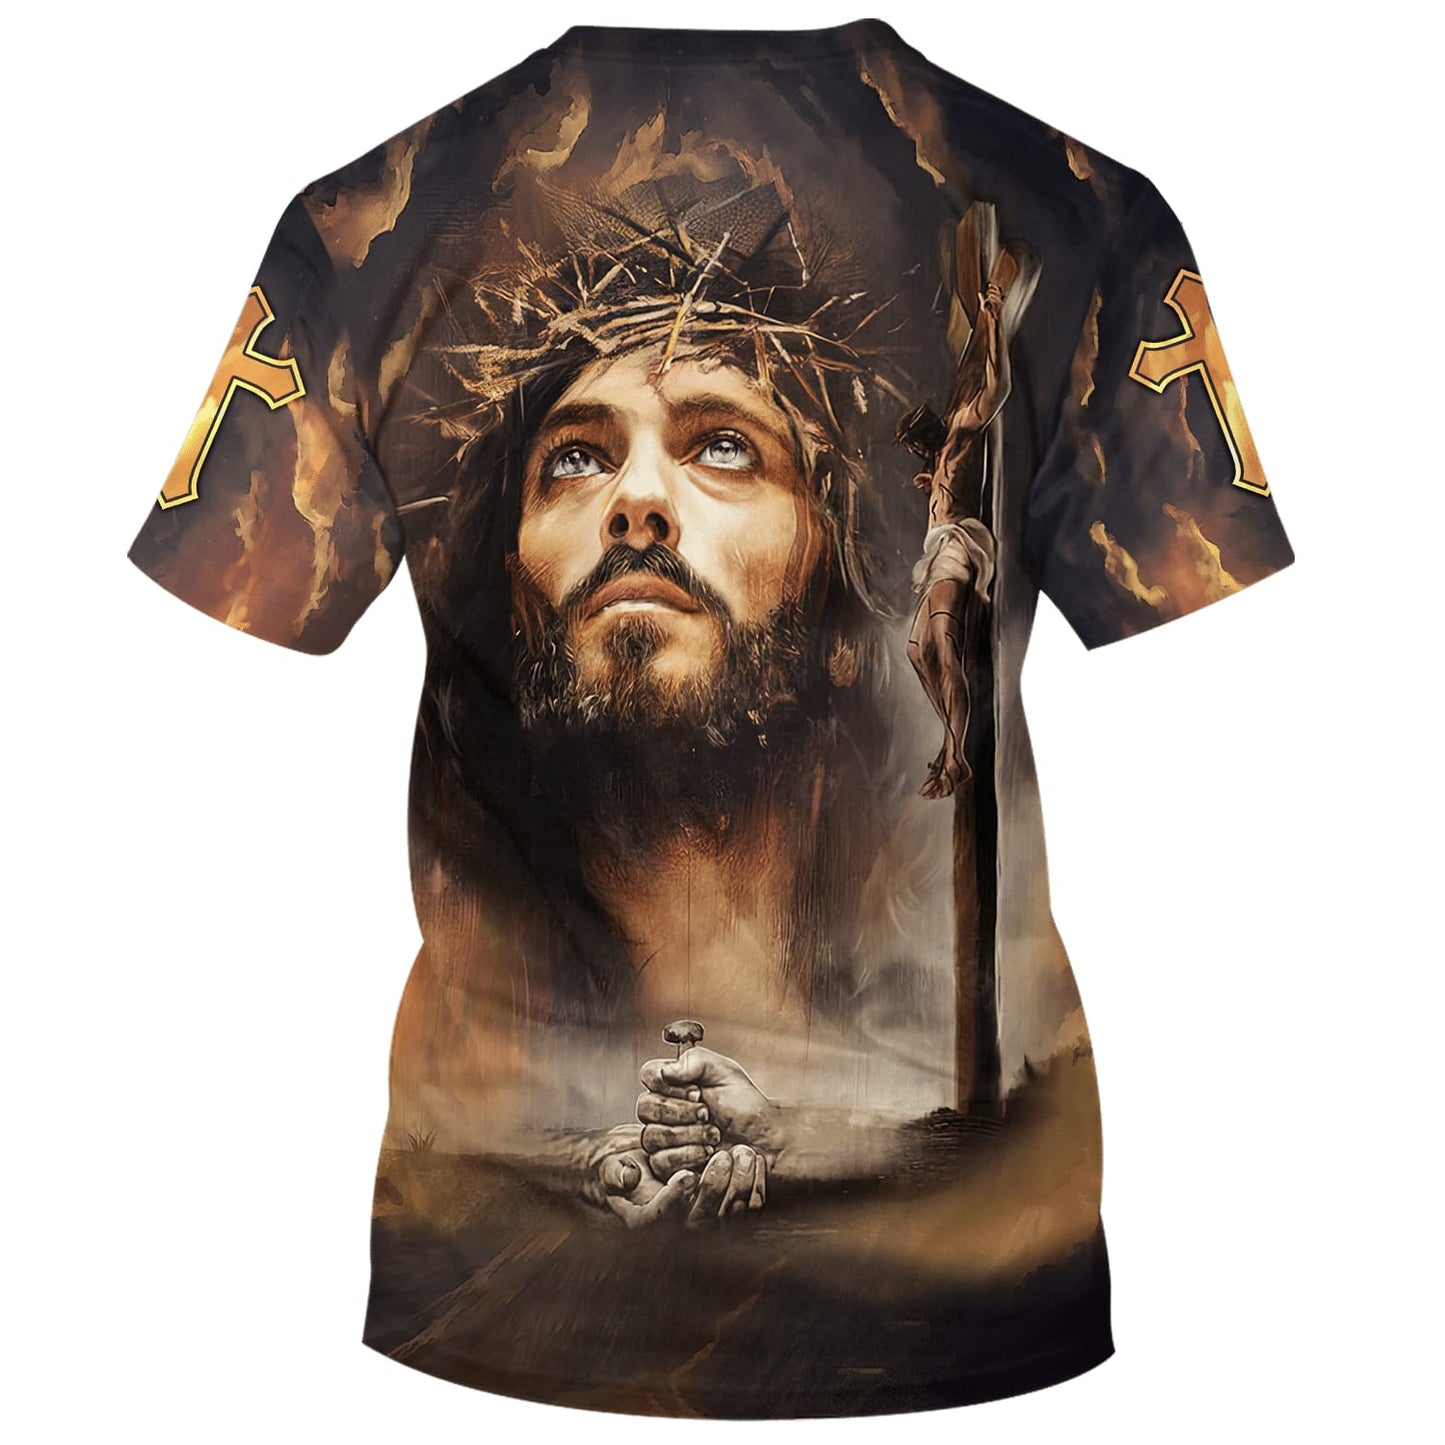 Jesus Christ Crucified On The Cross 3d T-Shirts - Christian Shirts For Men&Women